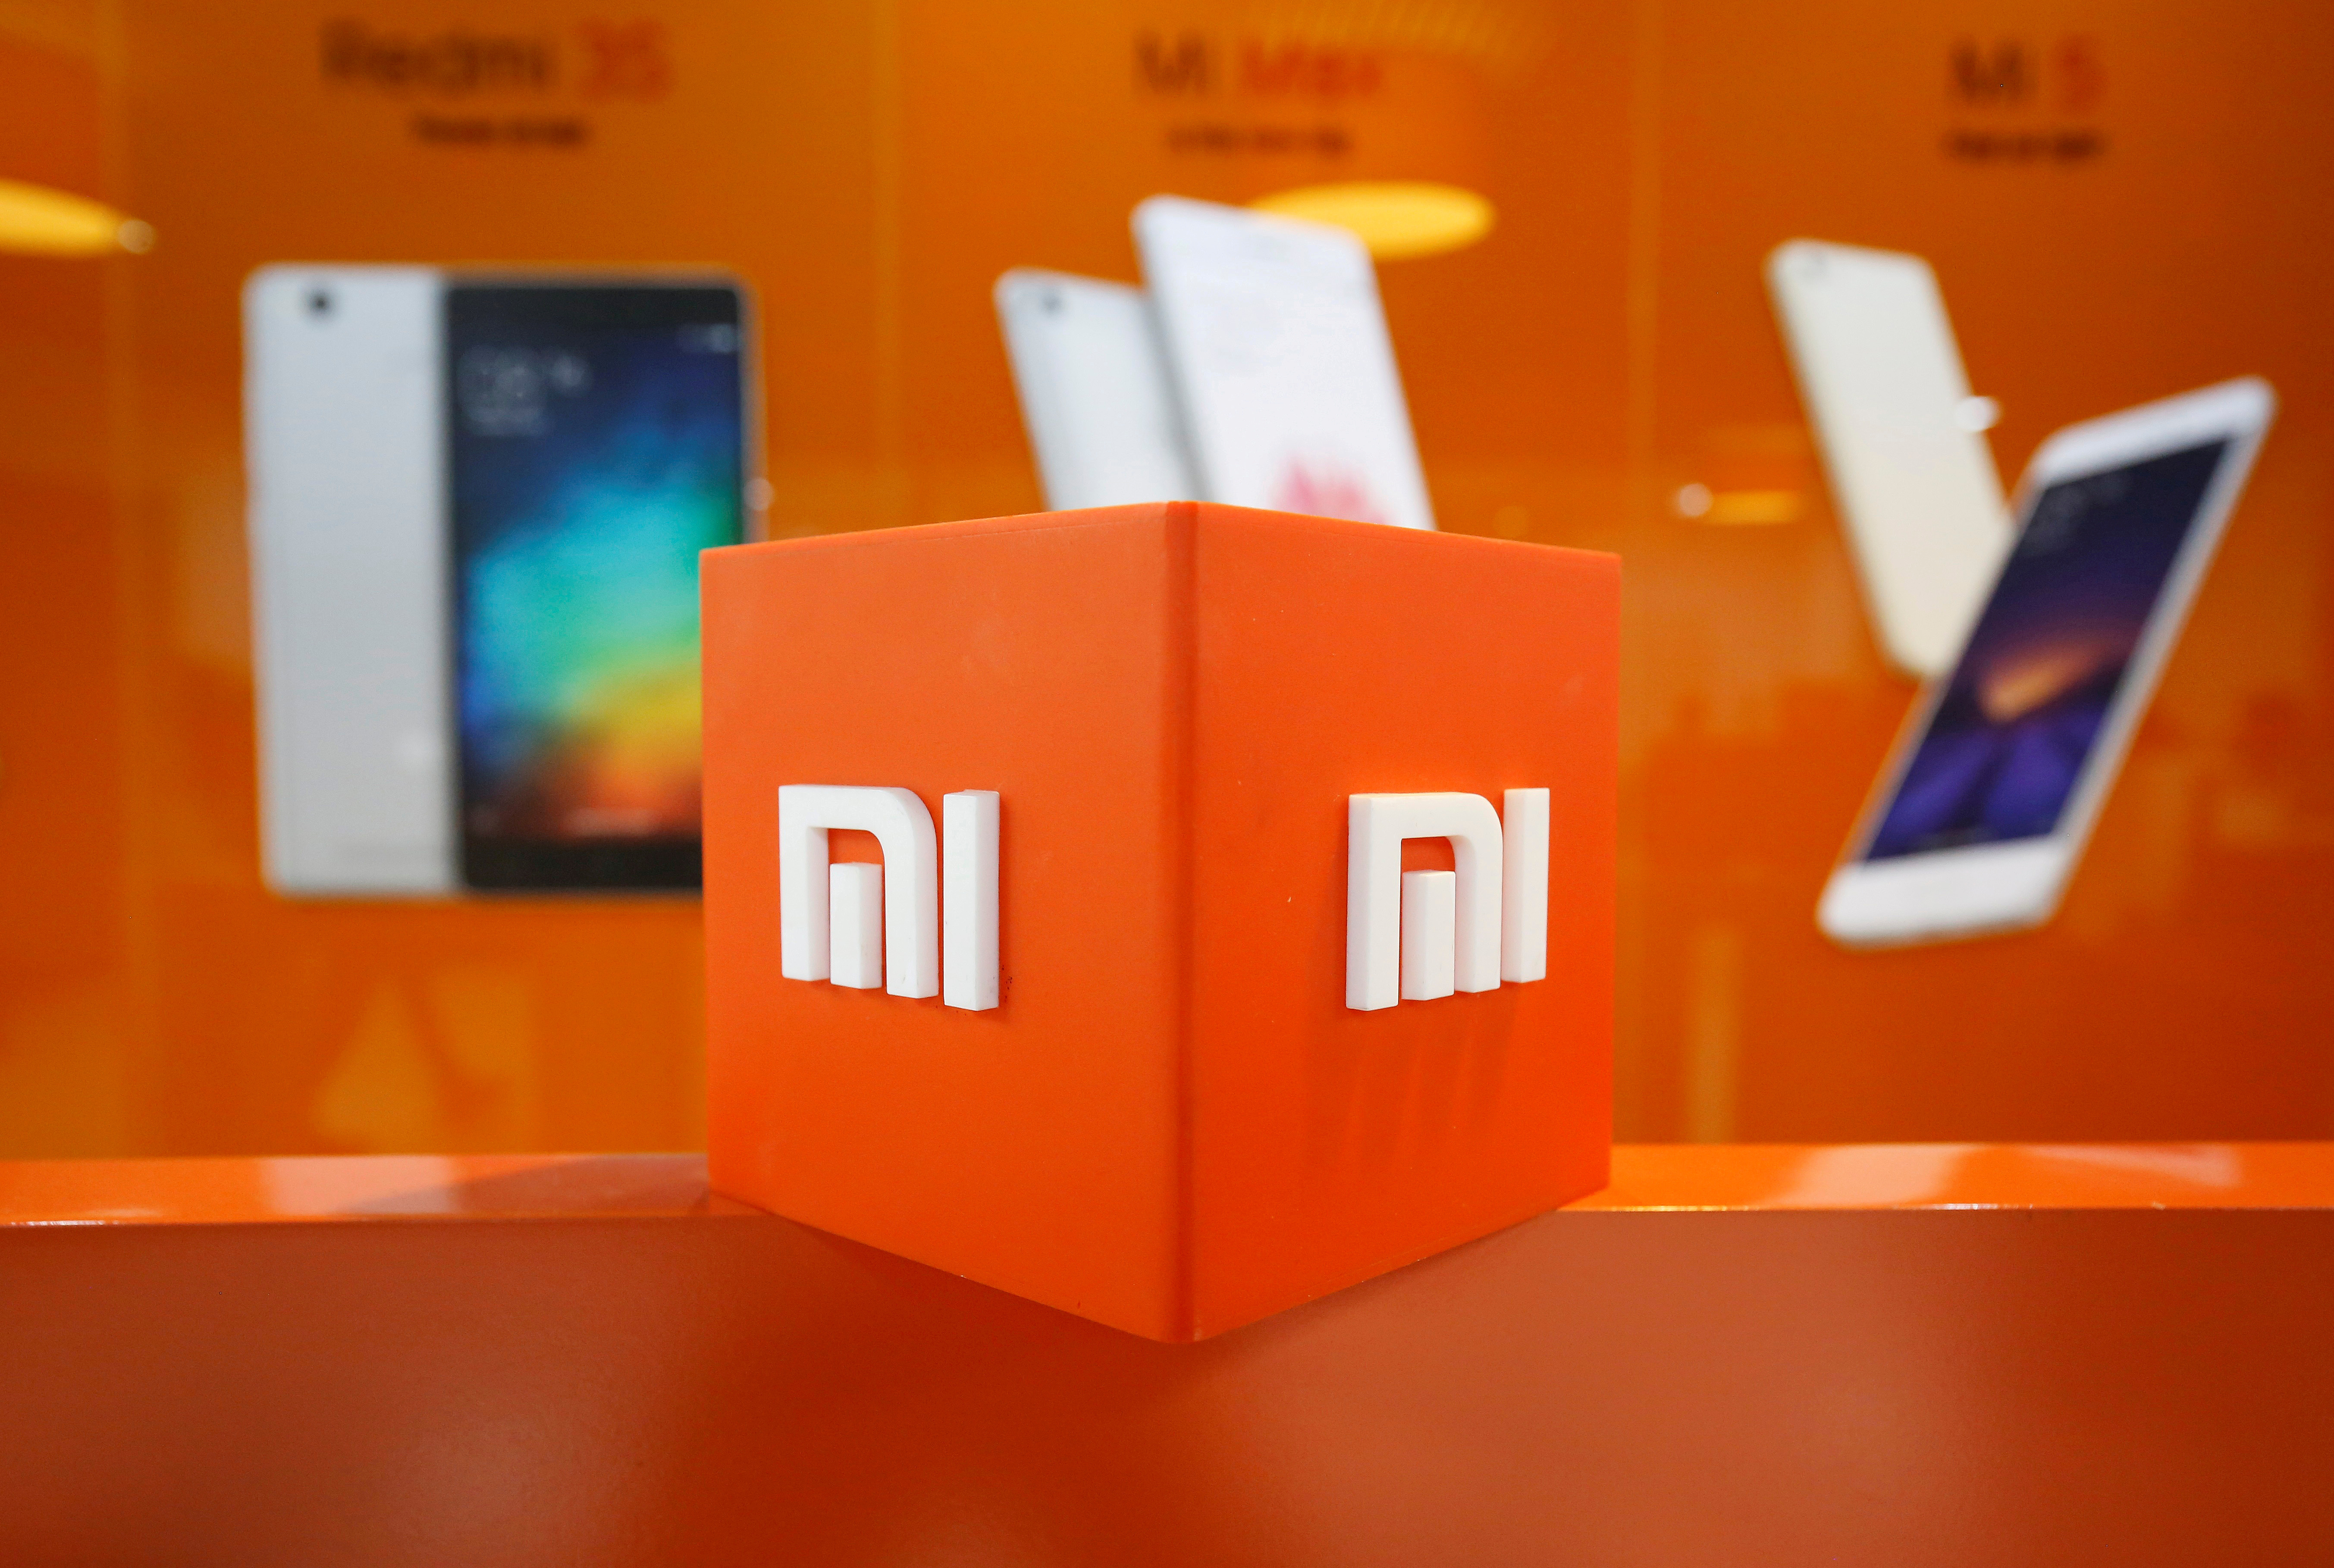 The logo of Xiaomi is seen inside the company's office in Bengaluru, India, January 18, 2018. REUTERS/Abhishek N. Chinnappa/File Photo